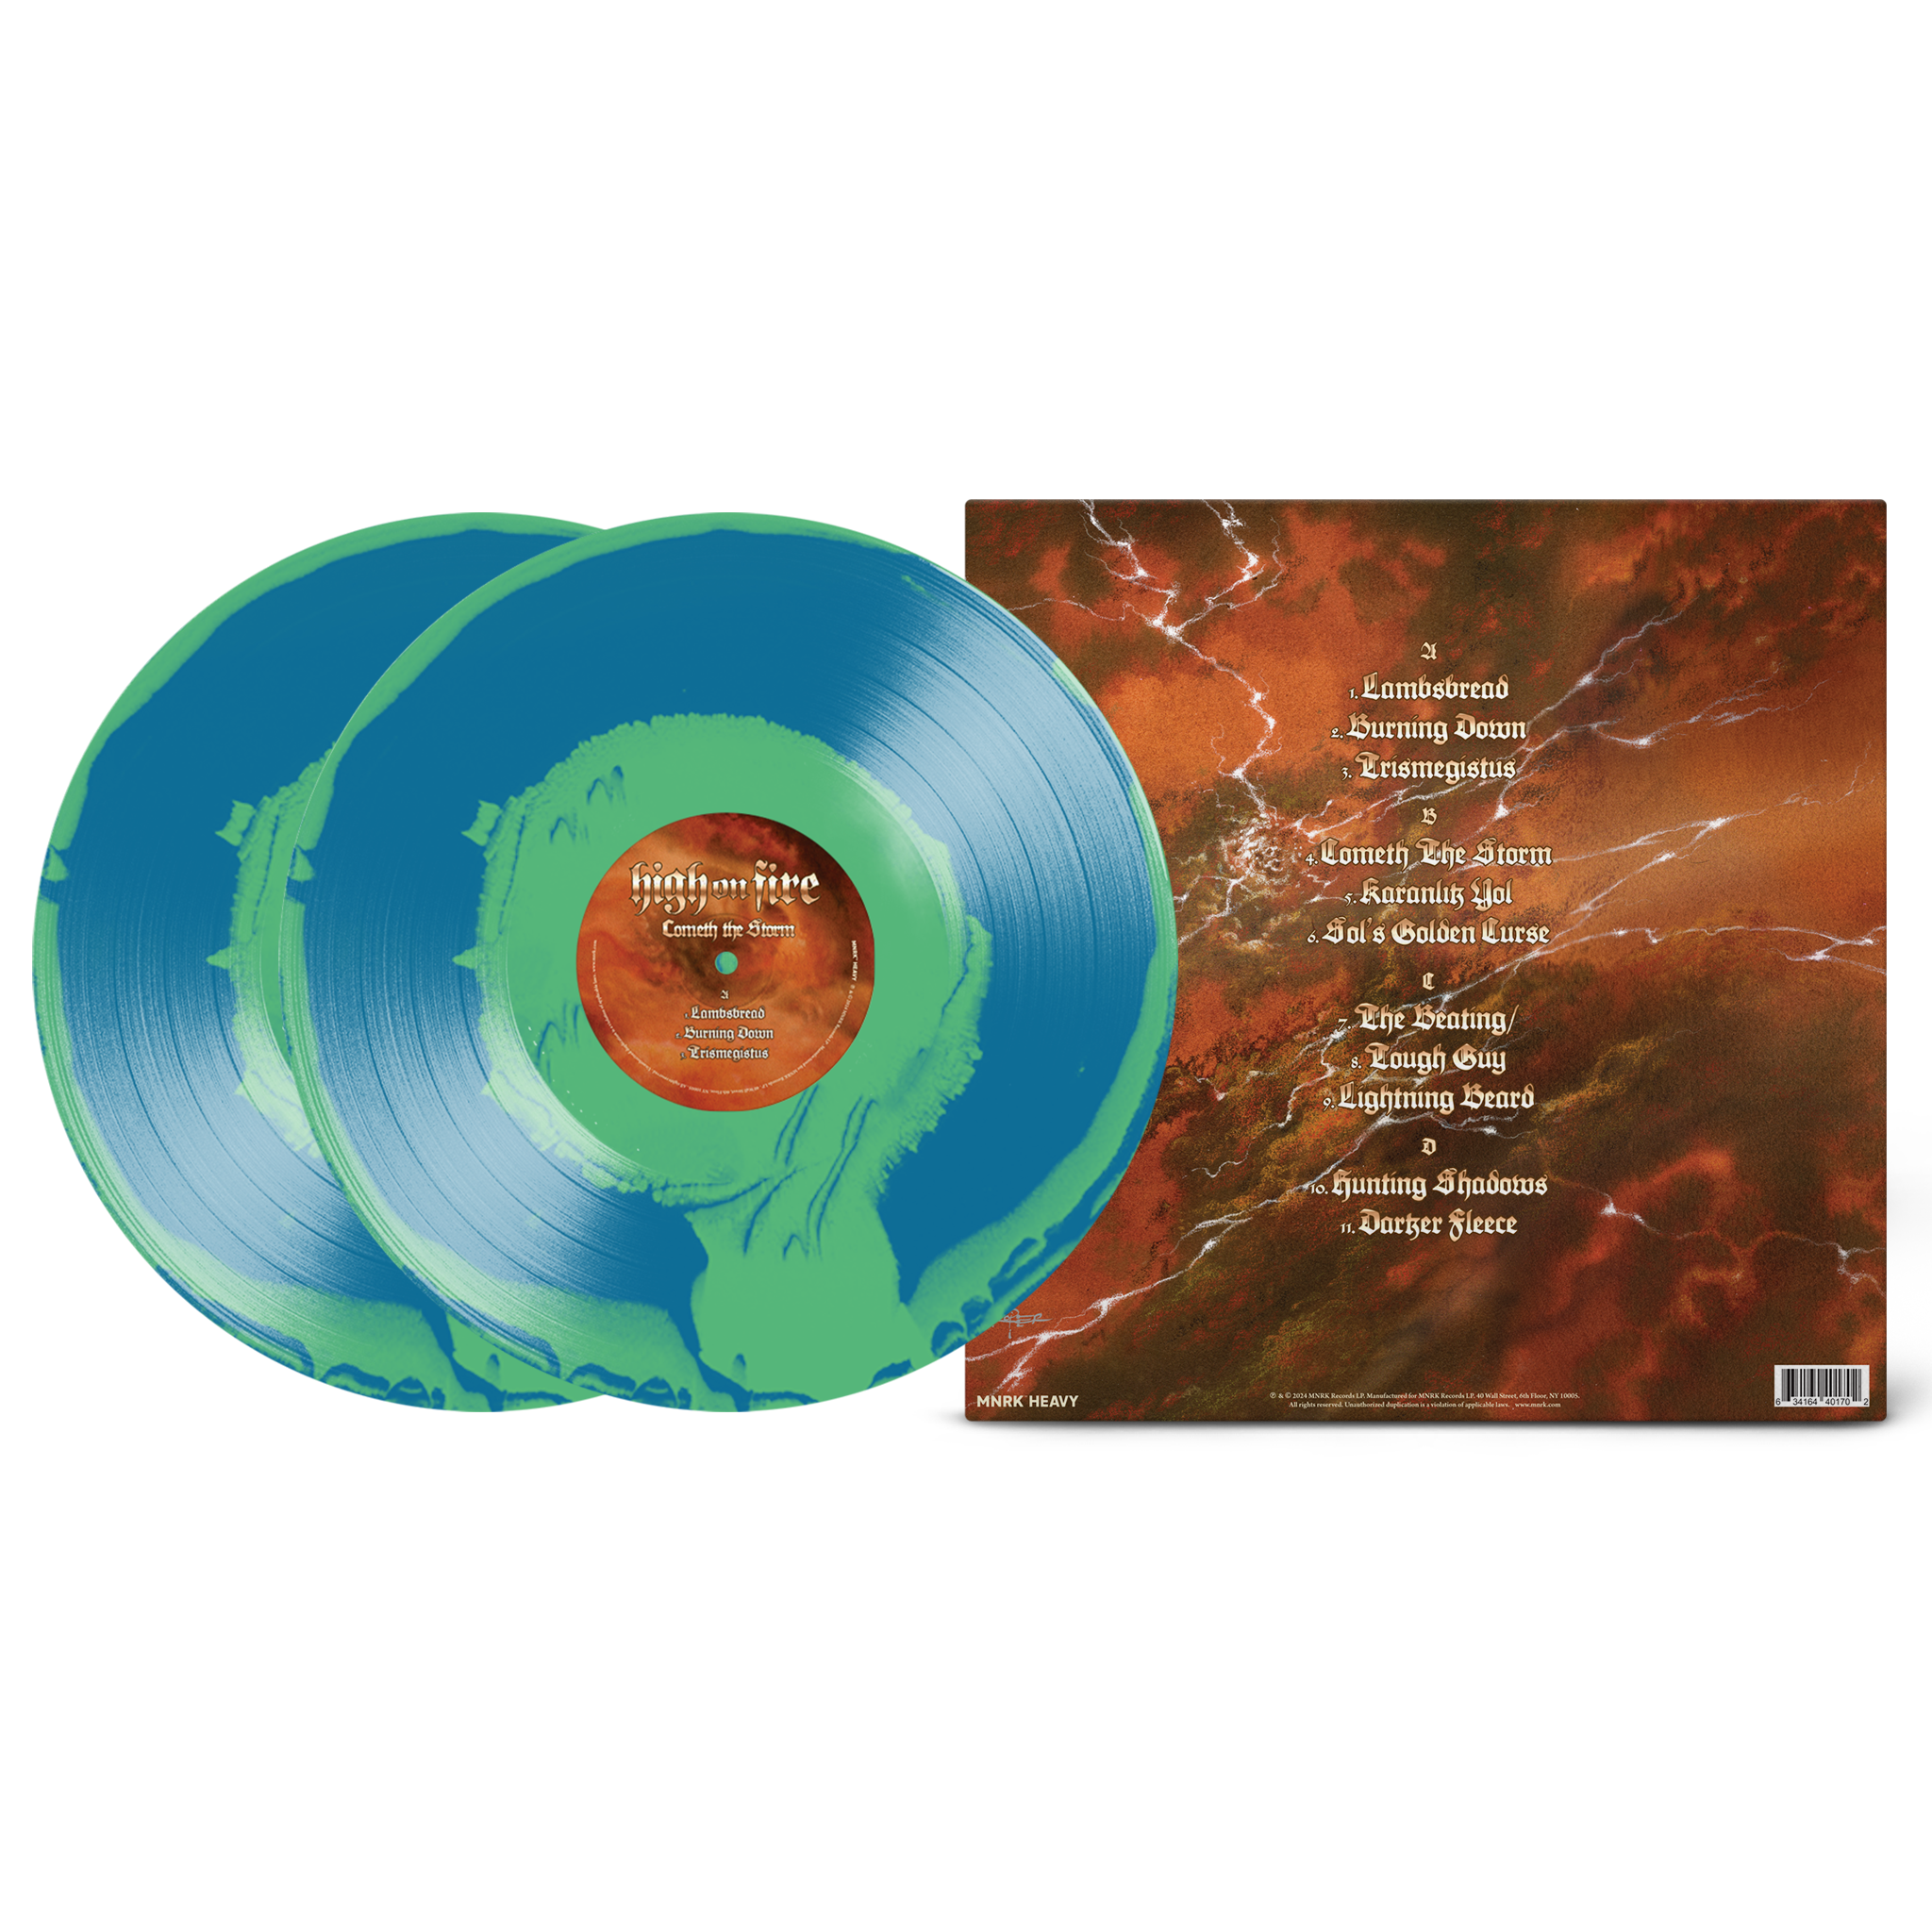 High On Fire - Cometh The Storm Two Color Variant